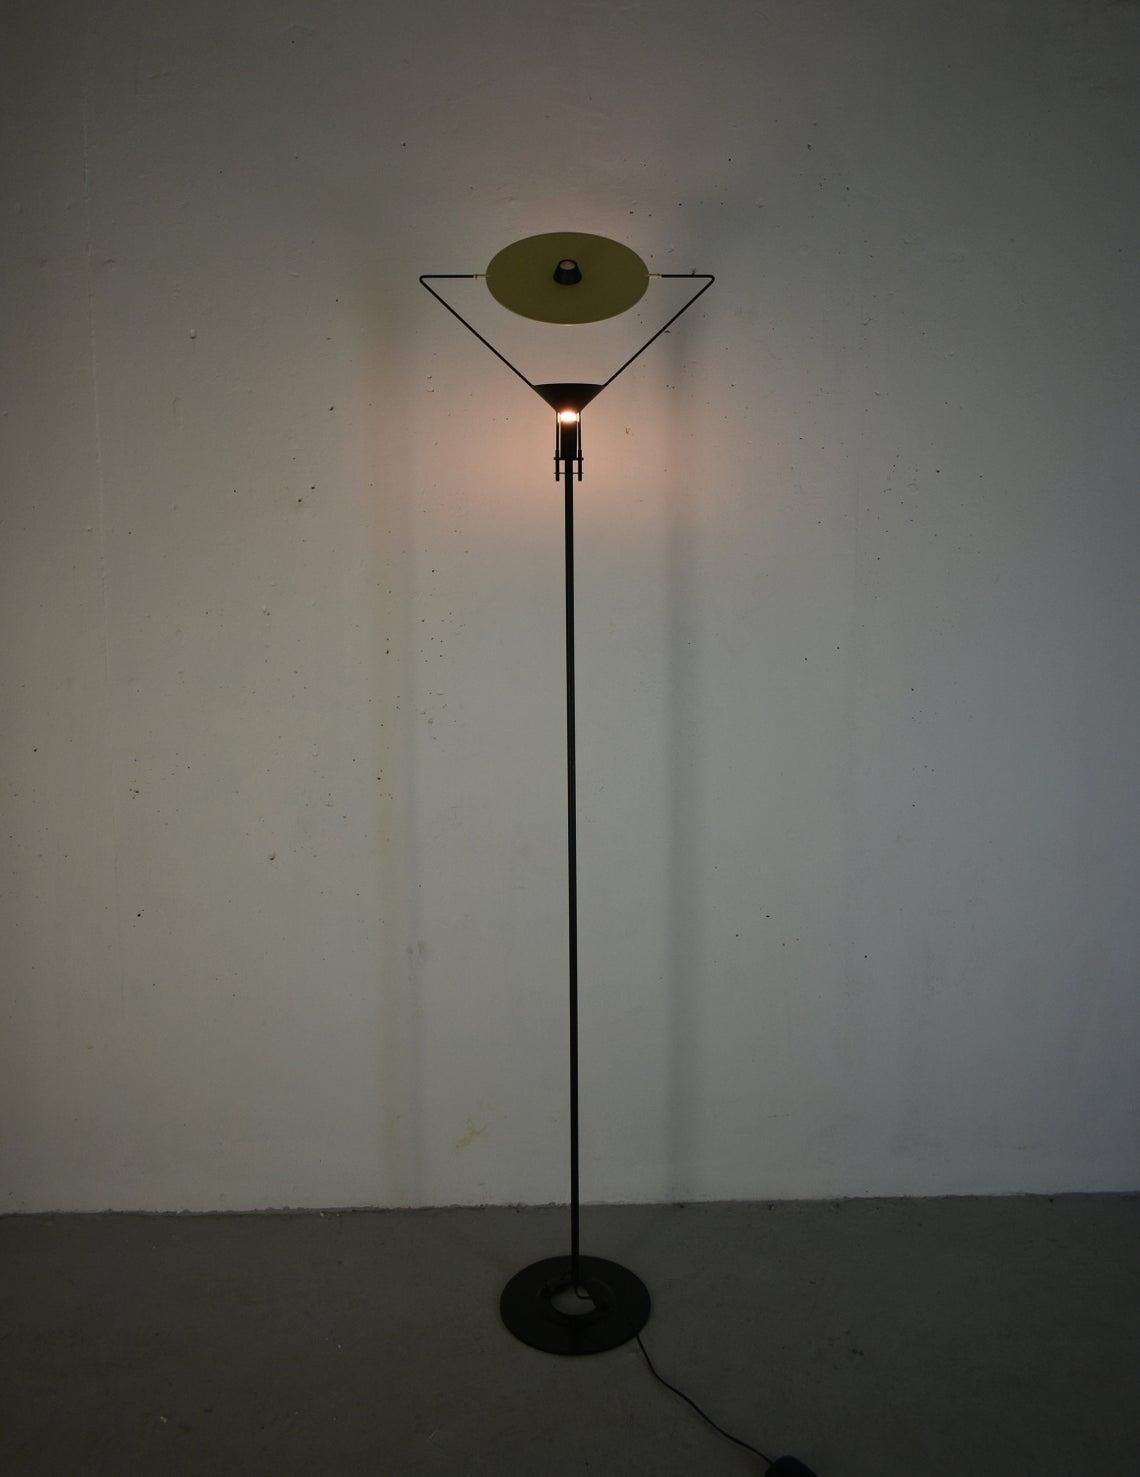 Italian postmodern floor lamp, designed by Carlo Forcolino for Artemide

Produced during the 1980s

The lamp has a black lacquered metal body and very sculptural round shaped diffuser with the lens positioned in the centre of the diffuser.